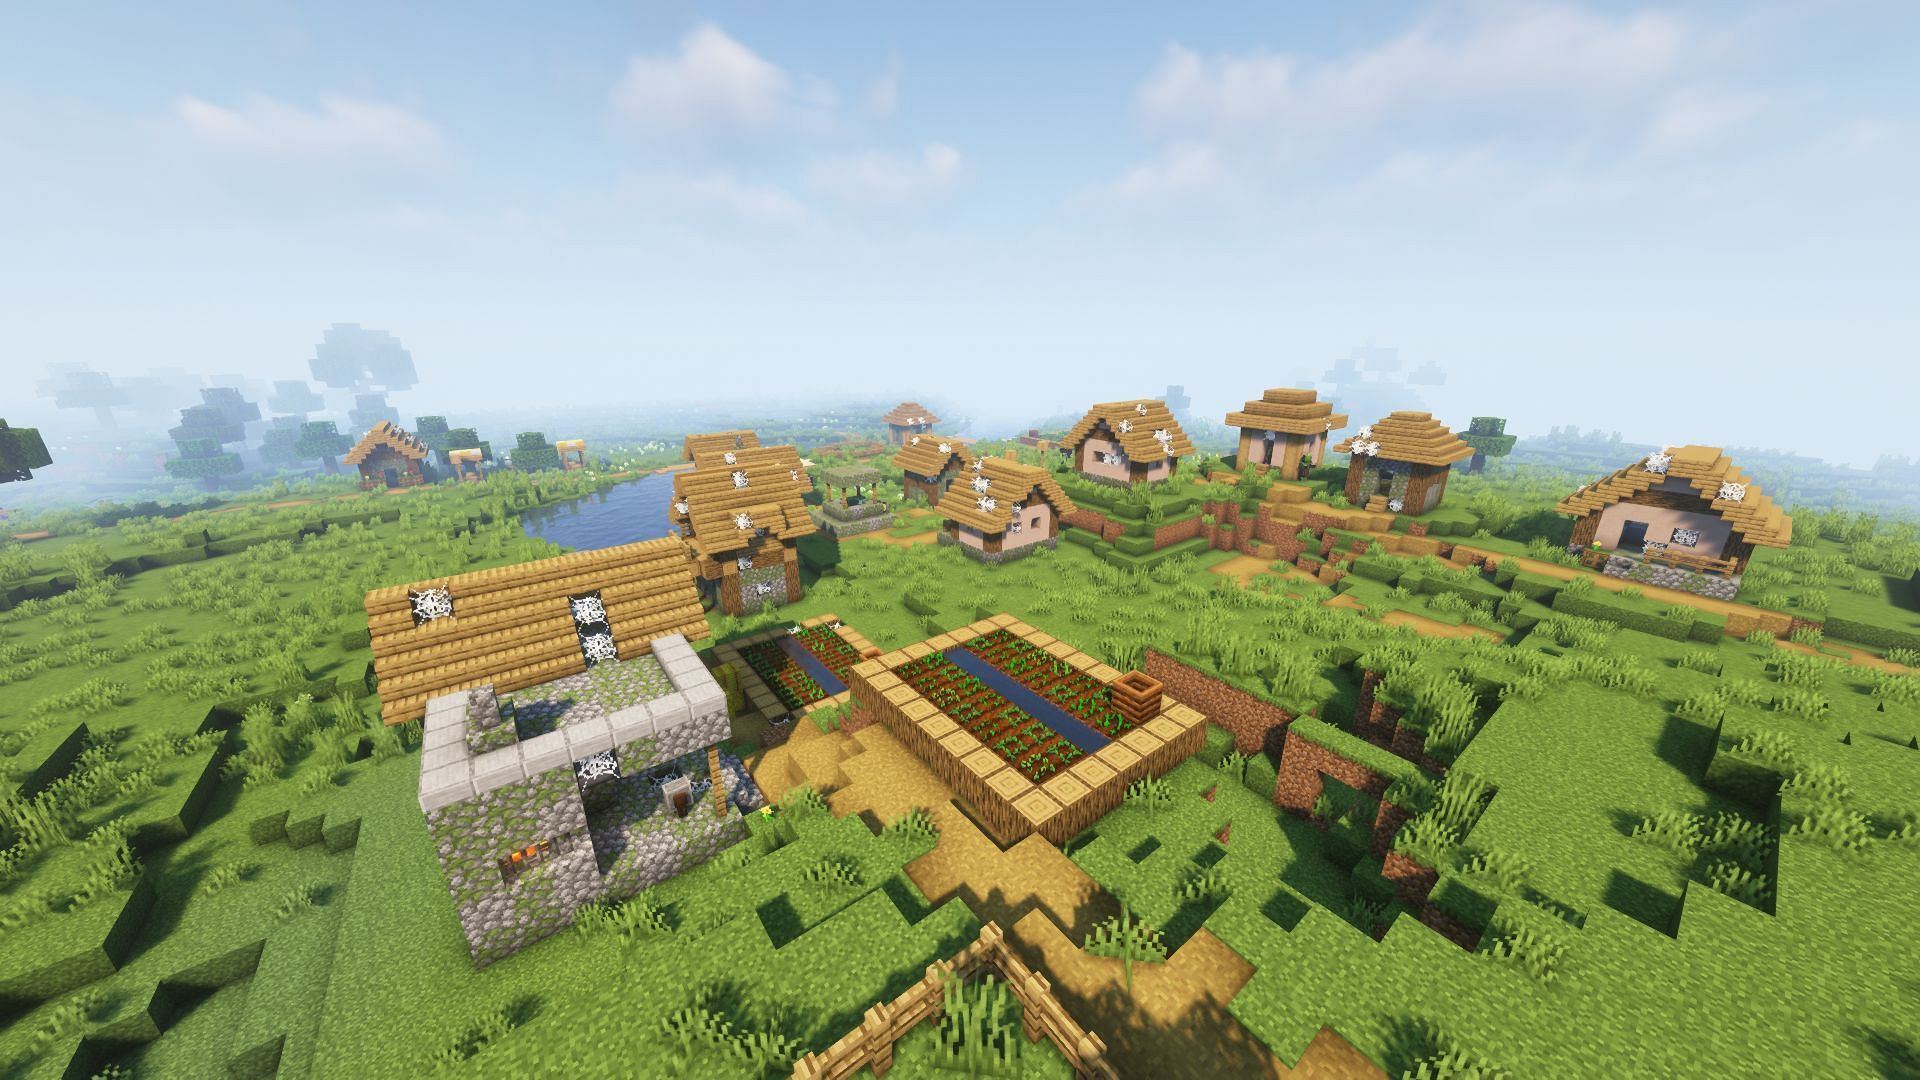 An abandoned village in the game (Image via Minecraft)